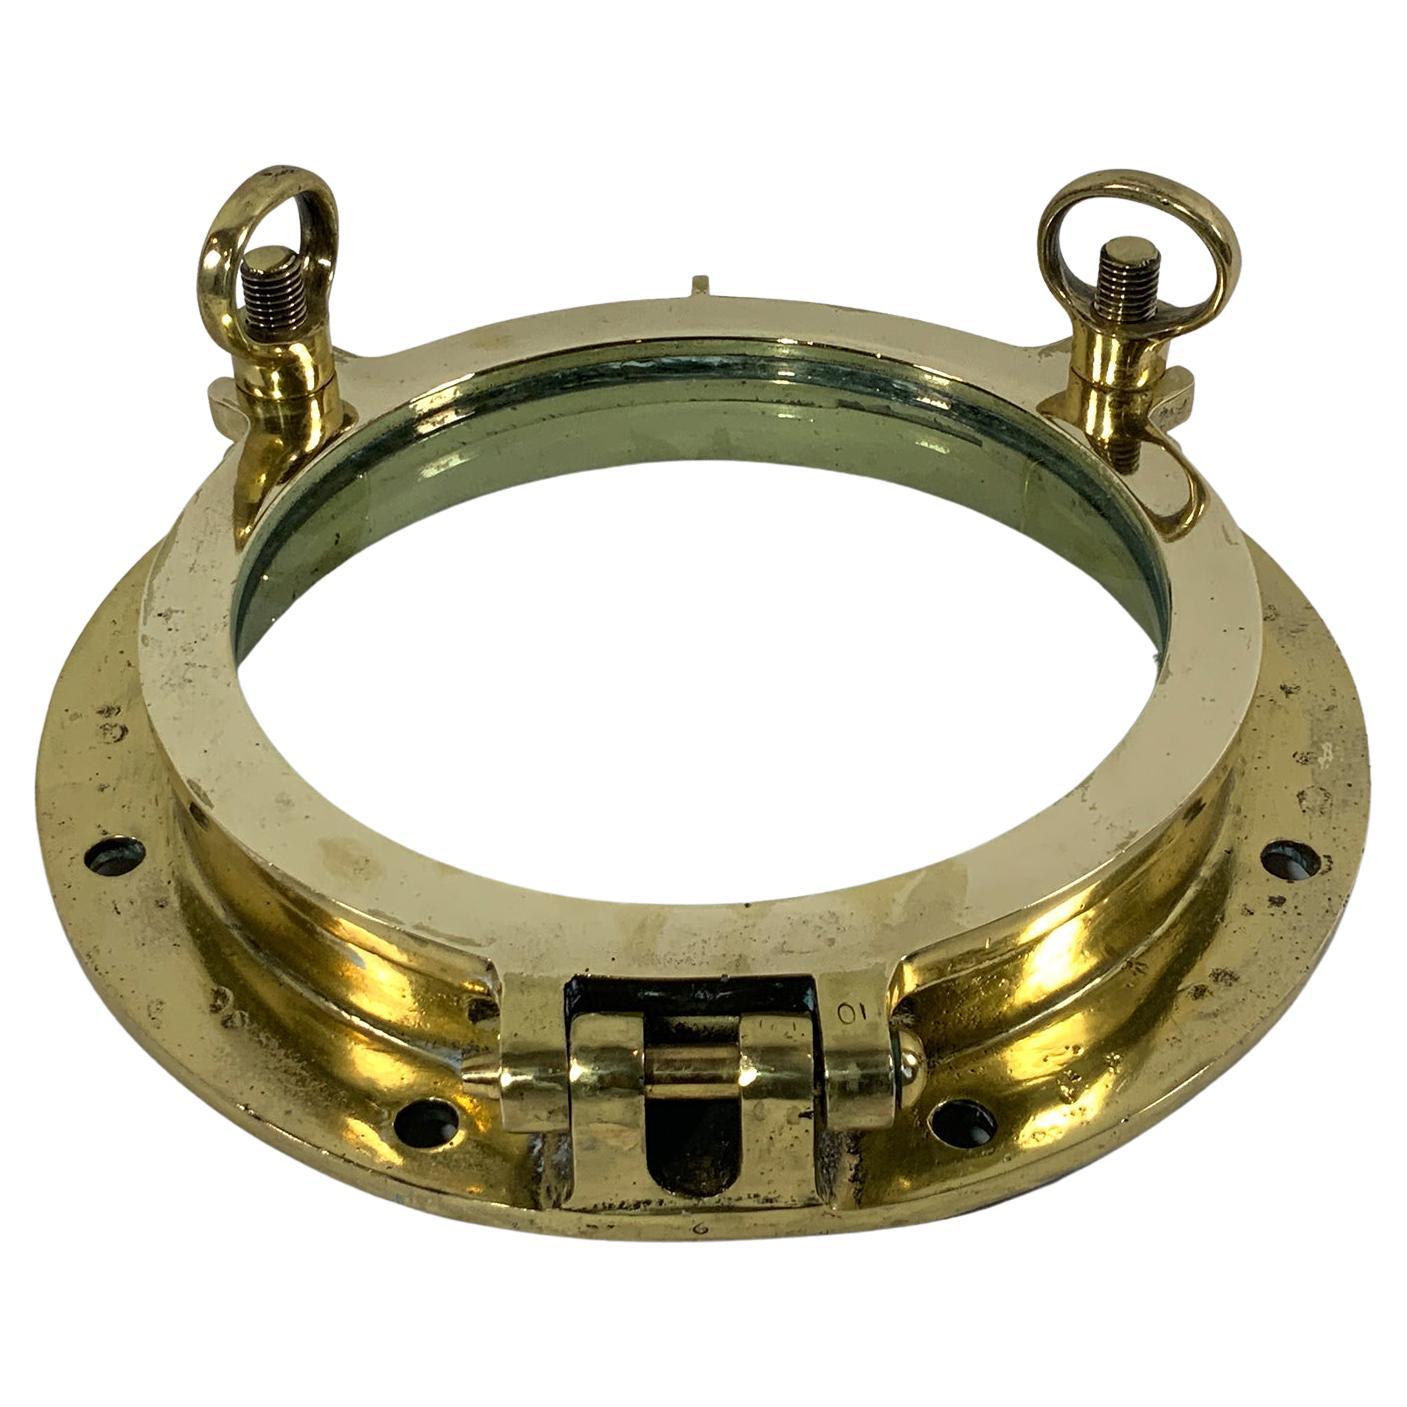 Solid Brass Ship or Yacht Porthole